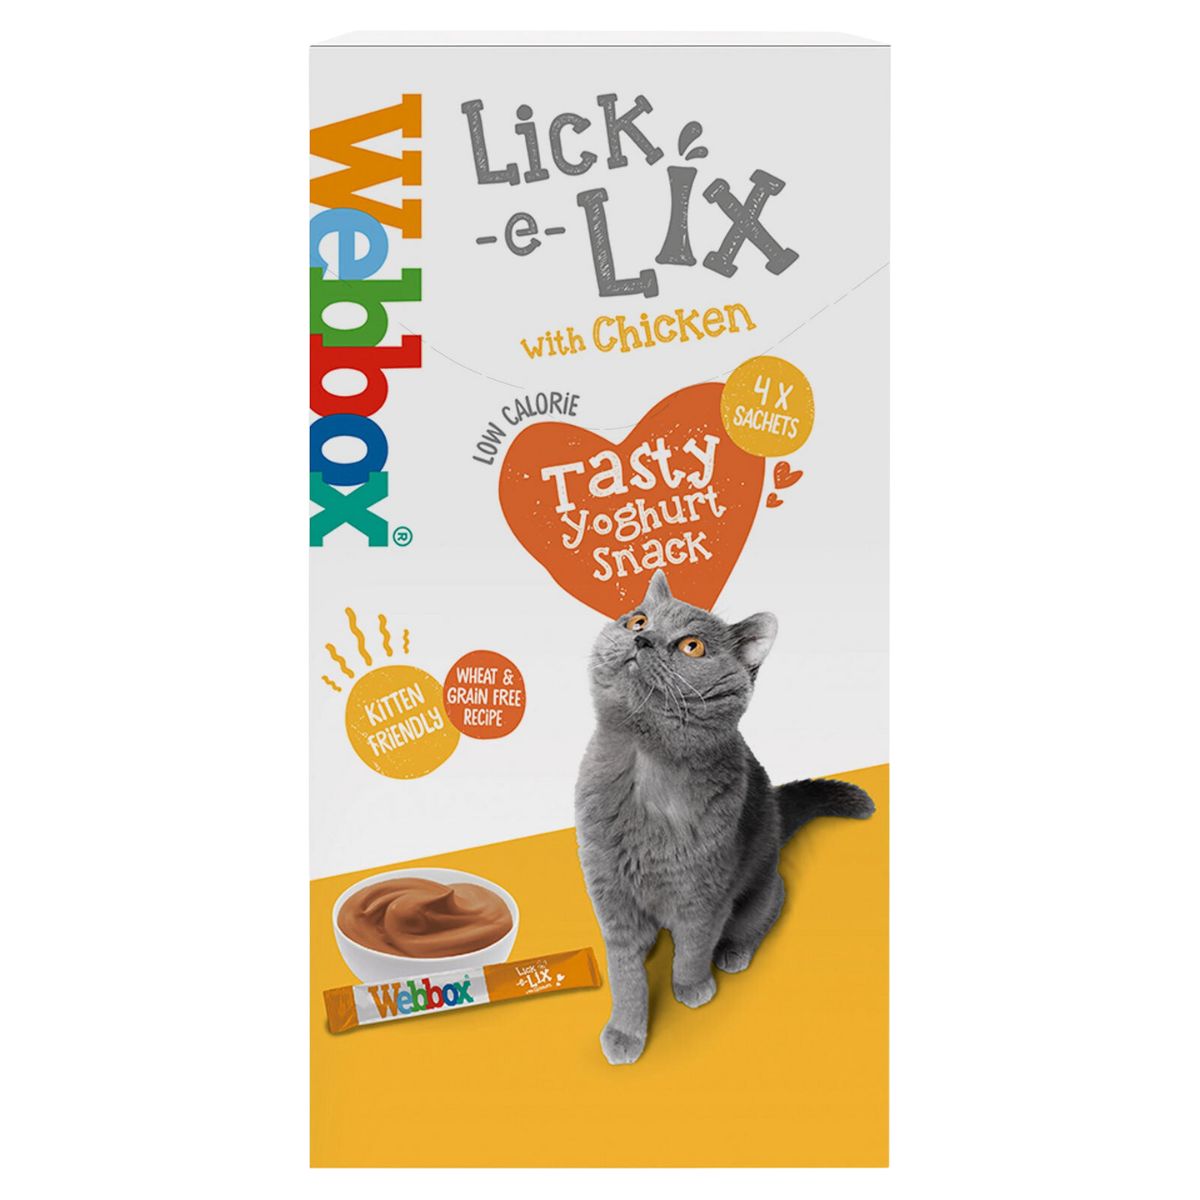 A box of Webbox - 5 Lick-e-Lix with Chicken Tasty Yoghurty Treat - 15g cat food with a cat on it.